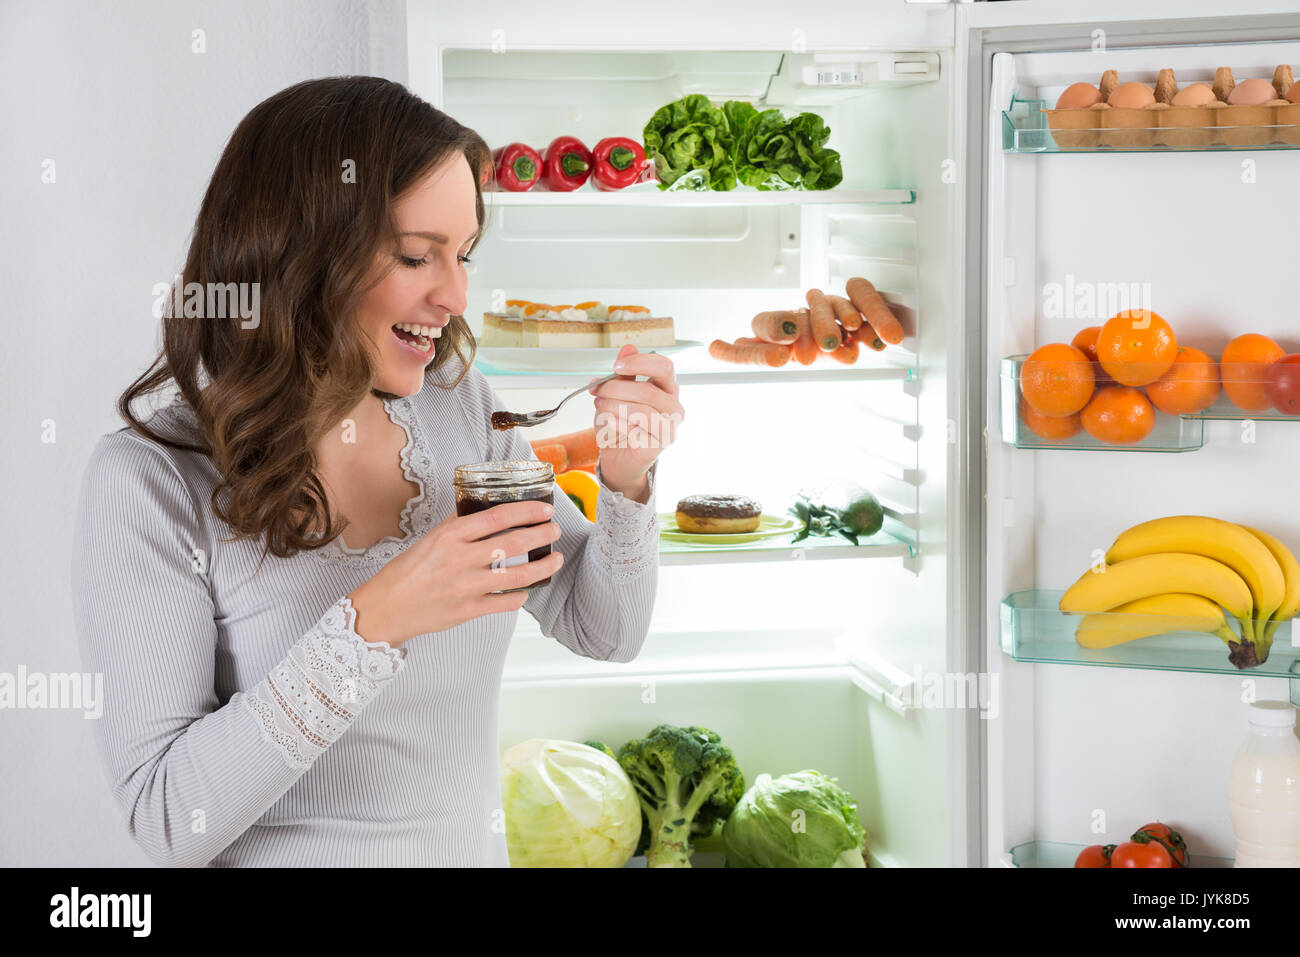 Young Woman Eating In Front Of Fridge In Kitchen Stock Photo